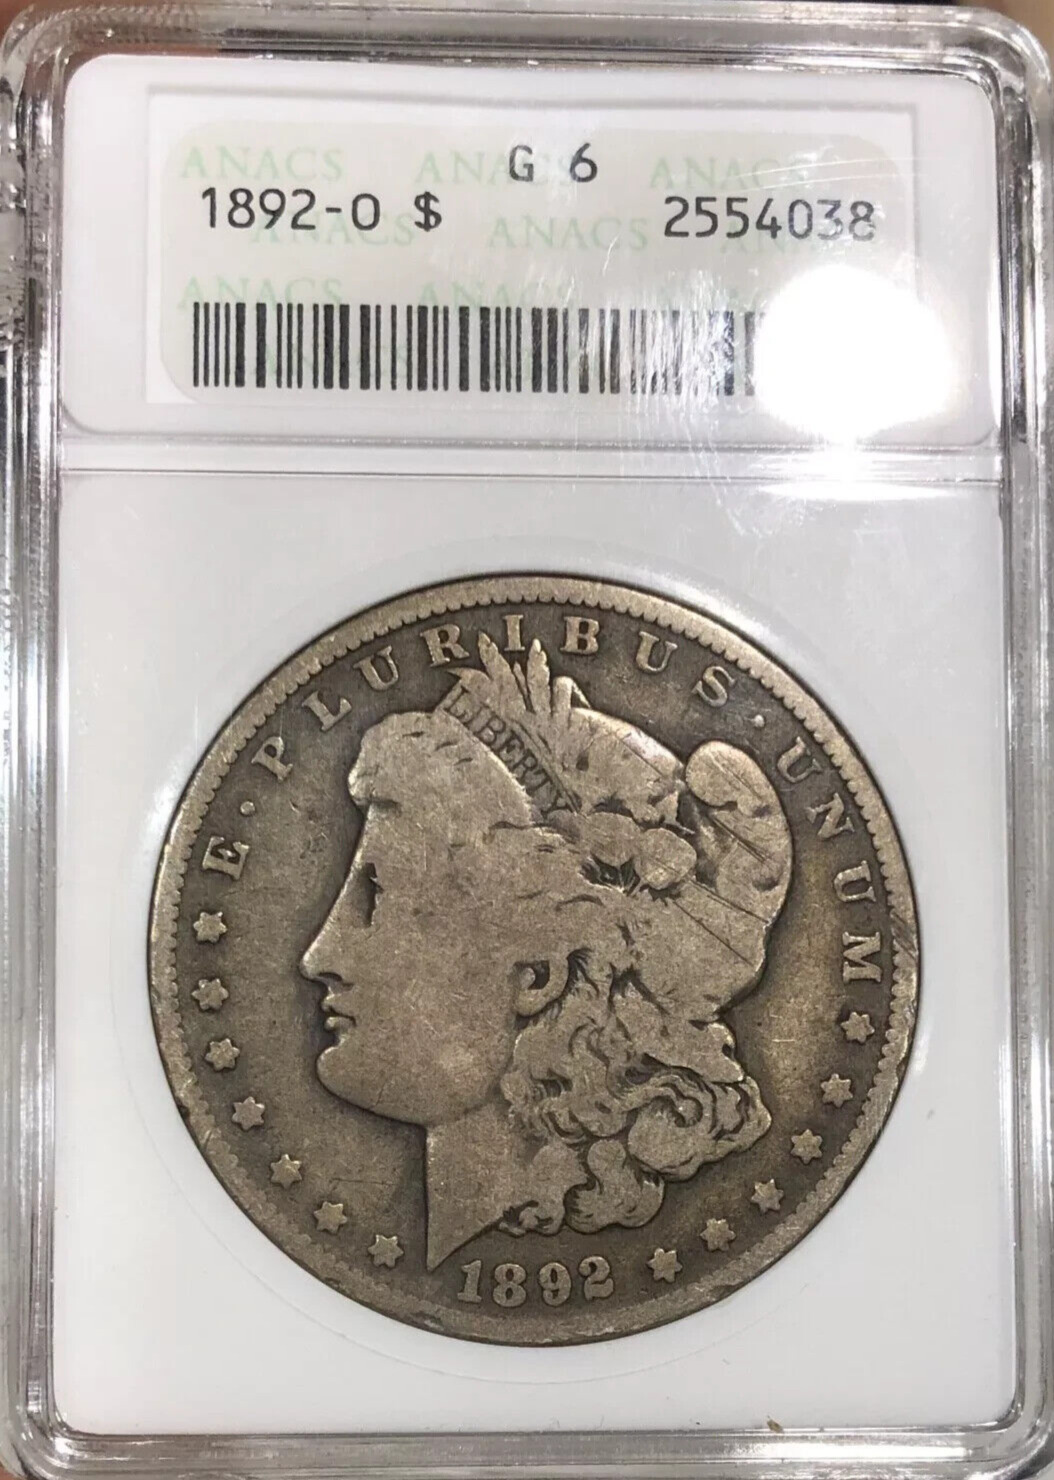 1892 O $1 MORGAN SILVER DOLLAR  ANACS G 6~~EXTREMELY LOW POPULTION